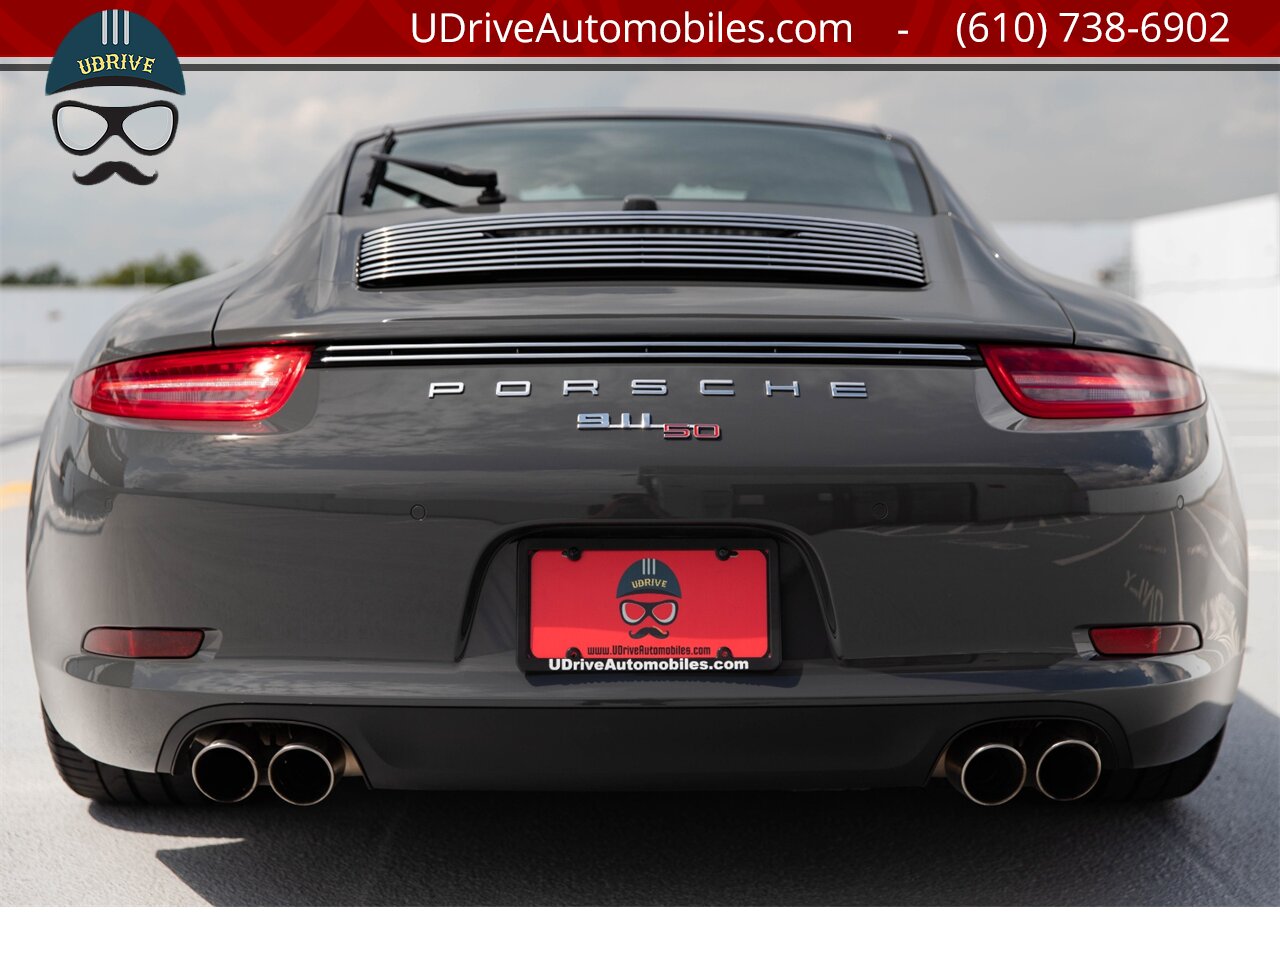 2014 Porsche 911 Carrera S 50th Anniversary Edition Certified  CPO Warranty thru 12/26/21 Full Front End Clear Film - Photo 18 - West Chester, PA 19382